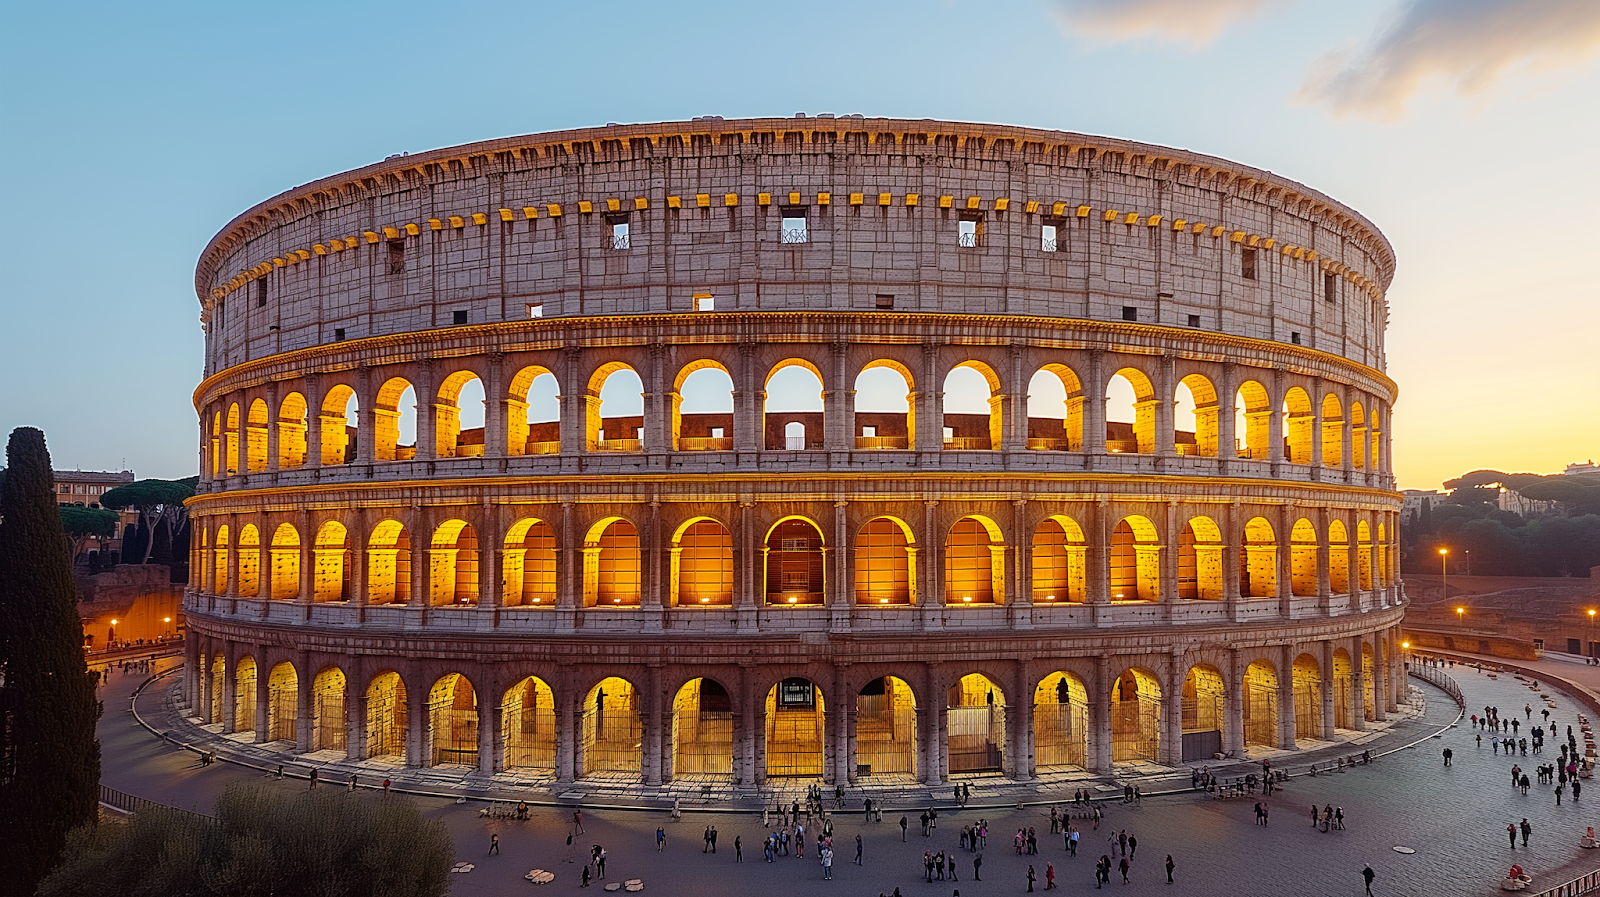 The Roman Colosseum today, still attracting millions of travelers every year